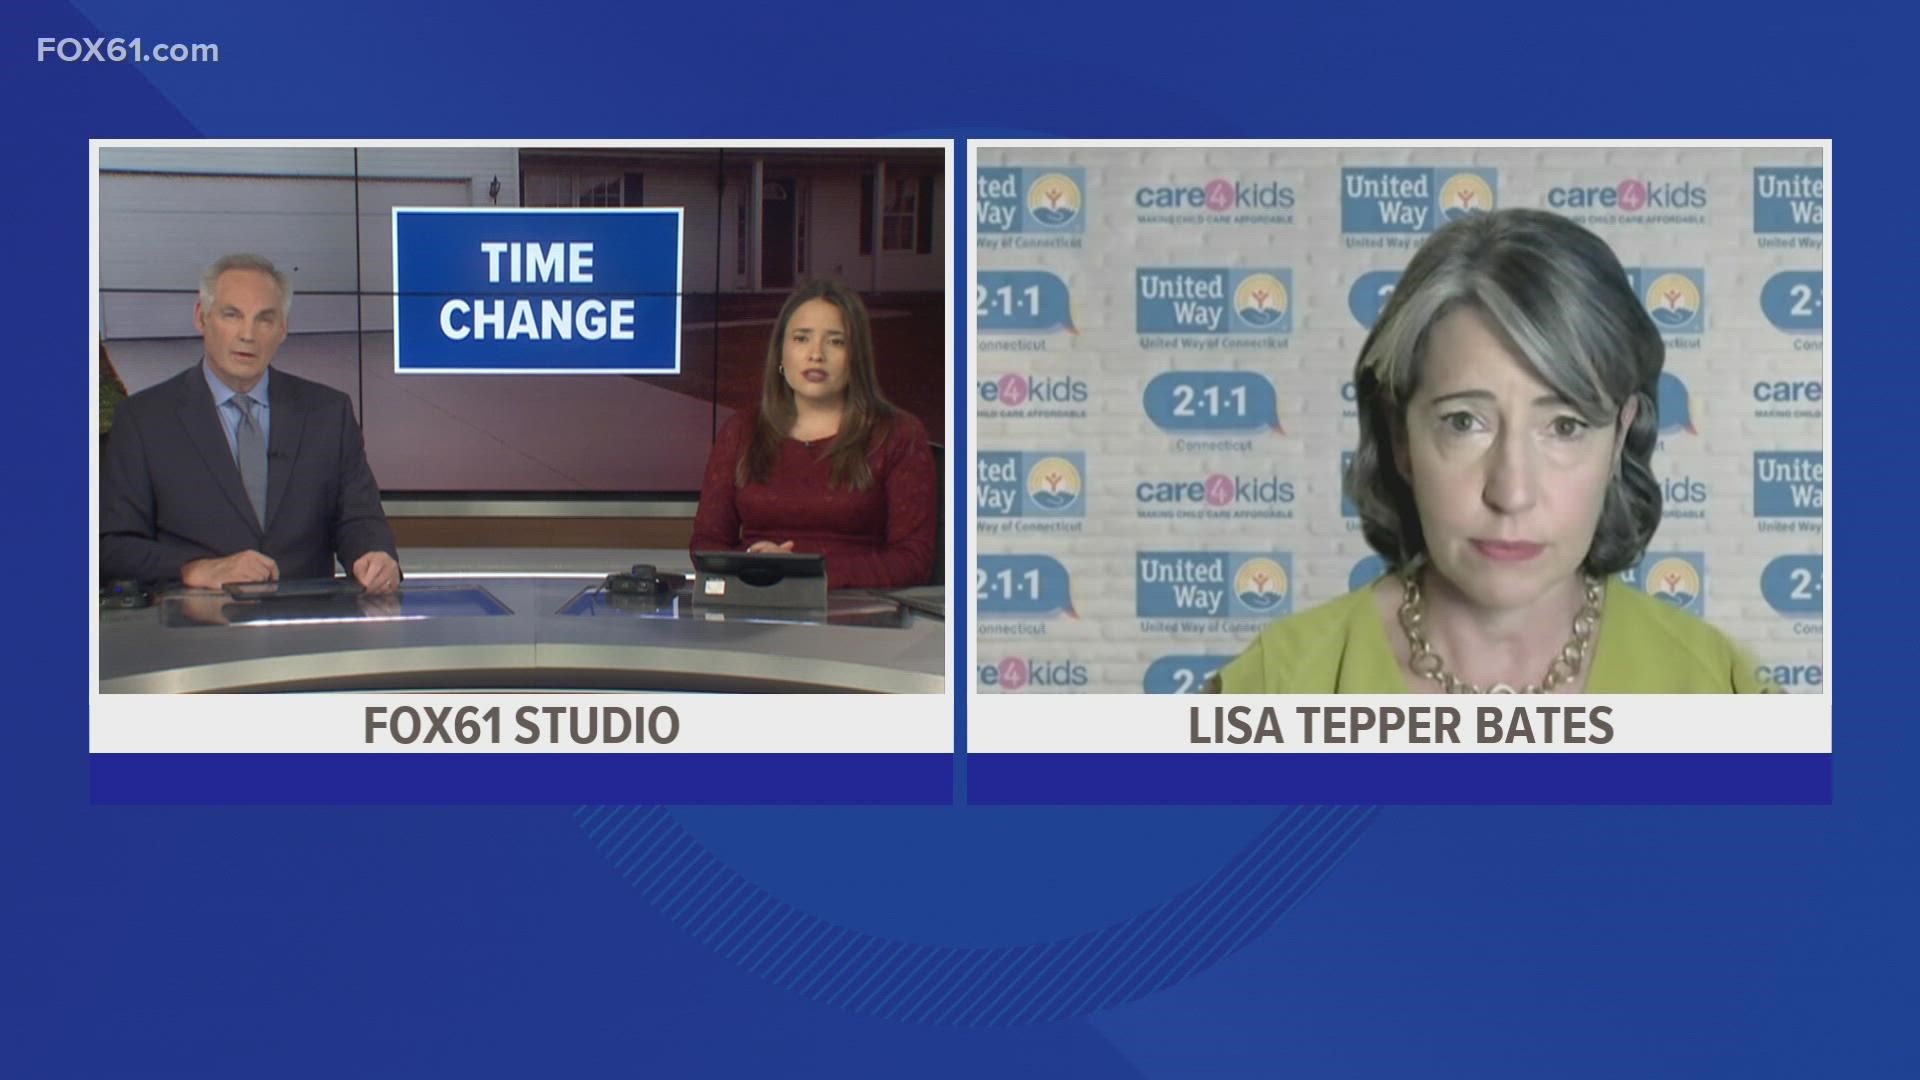 President and CEO of United Way of Connecticut Lisa Tepper Bates spoke to FOX61 about the 211 Housing Crisis Line Service.